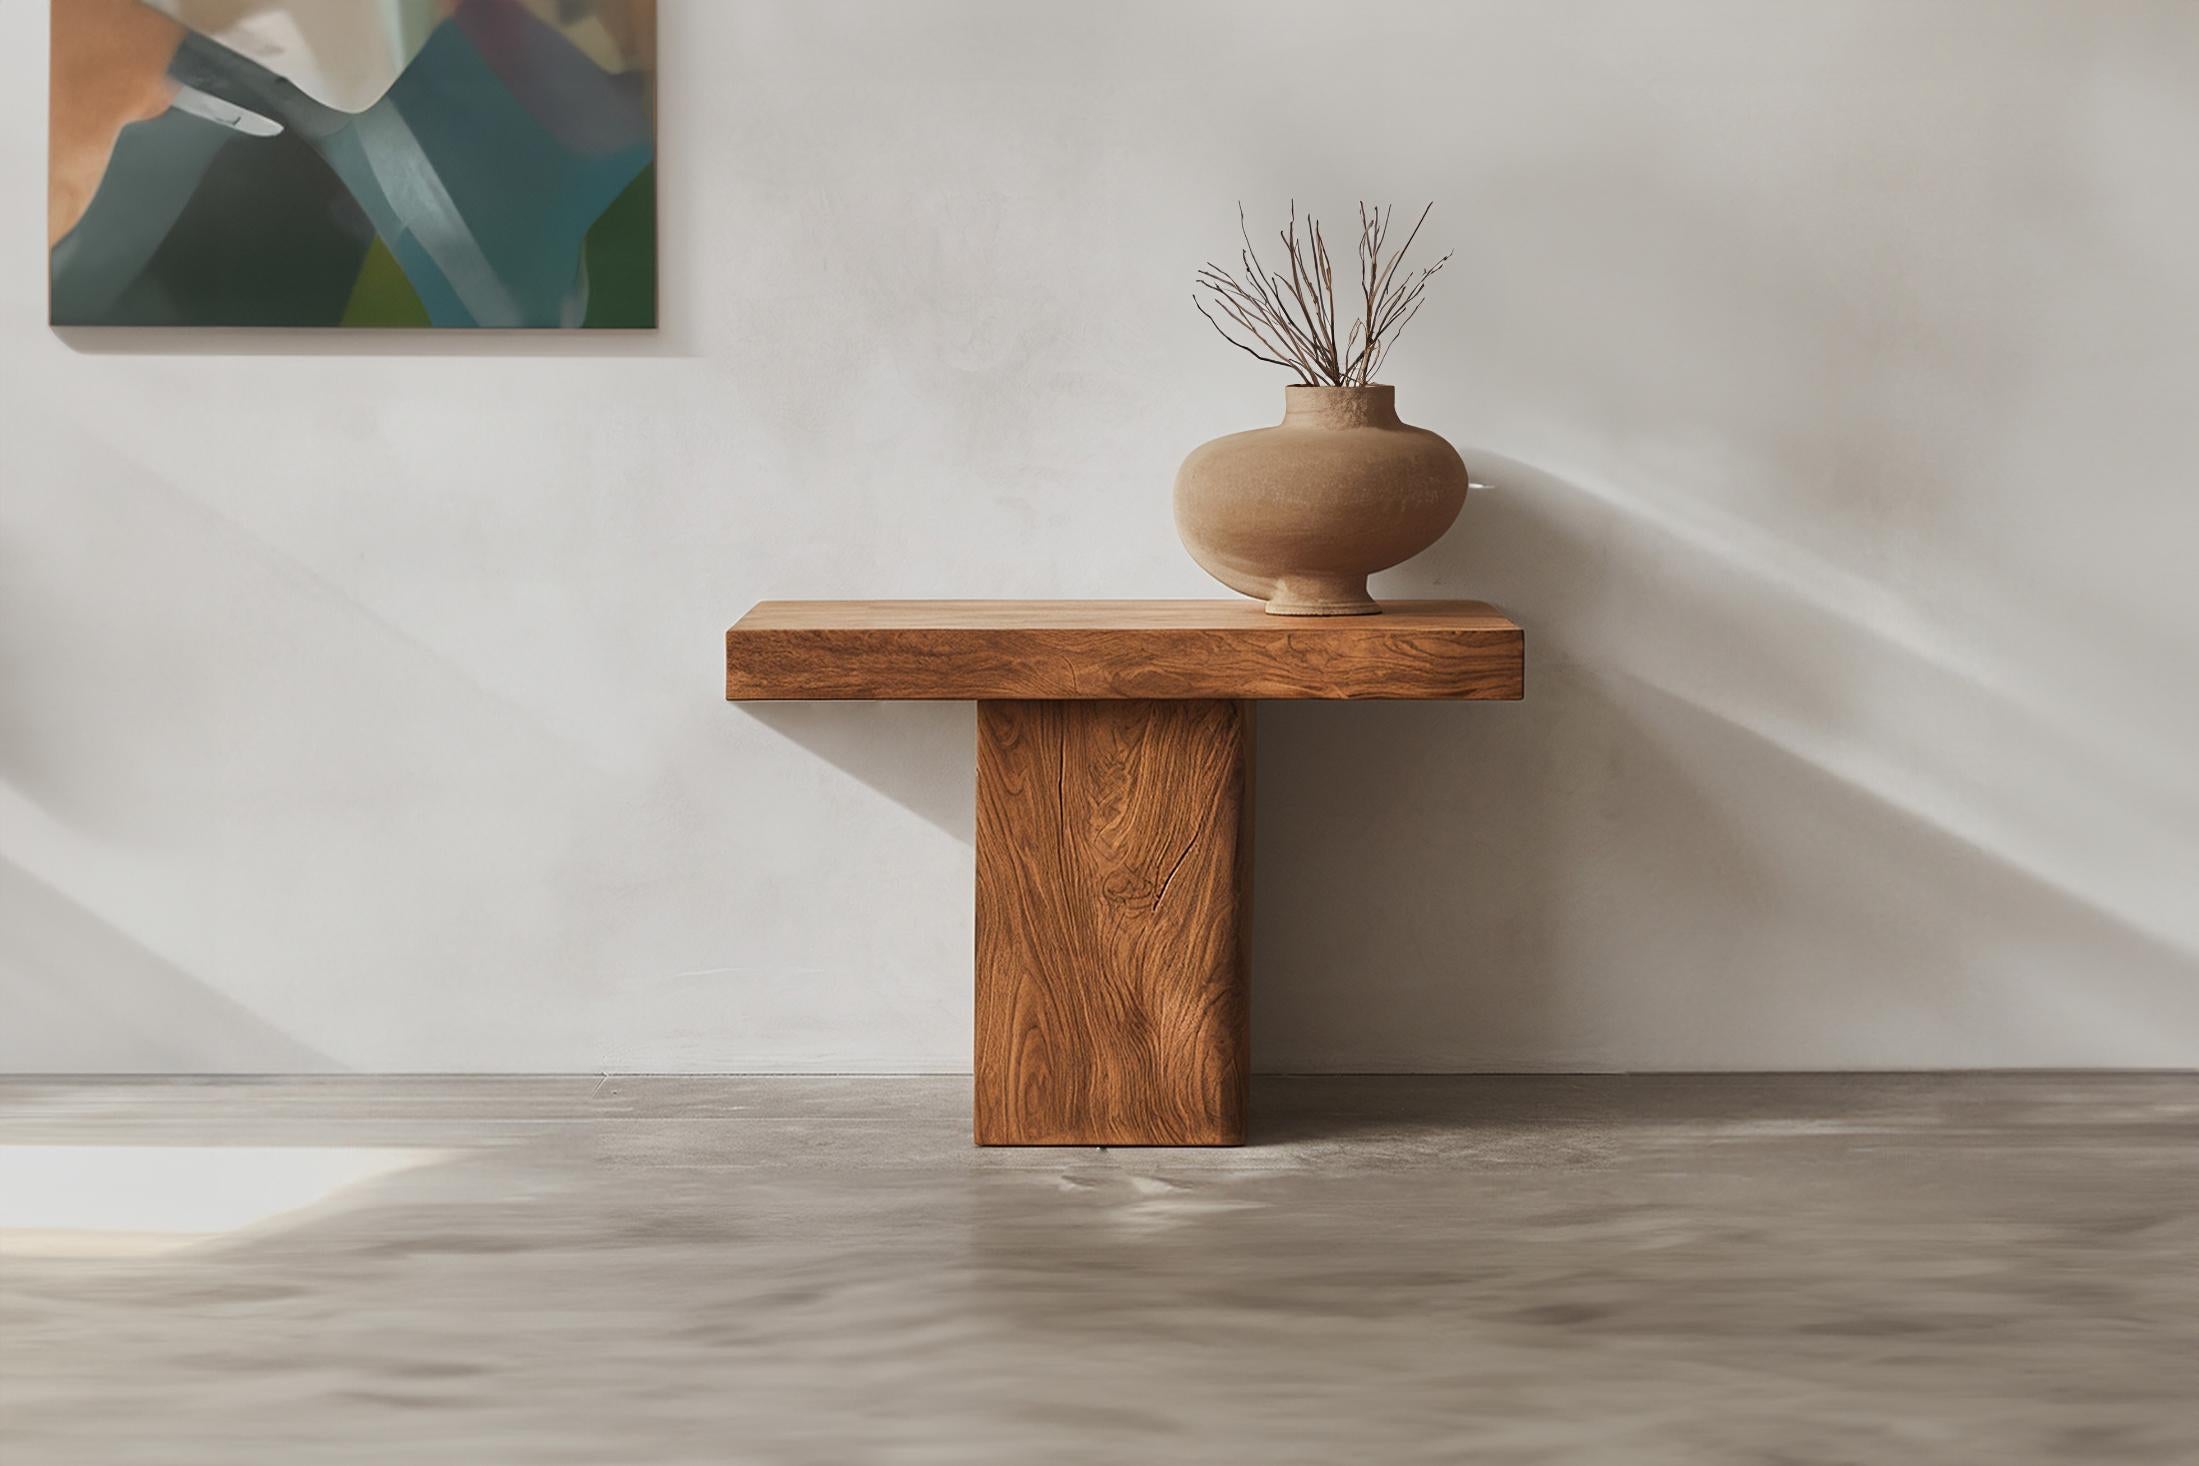 Minimalist Elefante Console 13, NONO Signature Oak, Balanced Structure
—————————————————————
Elefante Collection: A Harmony of Design and Heritage by NONO

Crafting Elegance with a Modernist Touch

NONO, renowned for its decade-long journey in